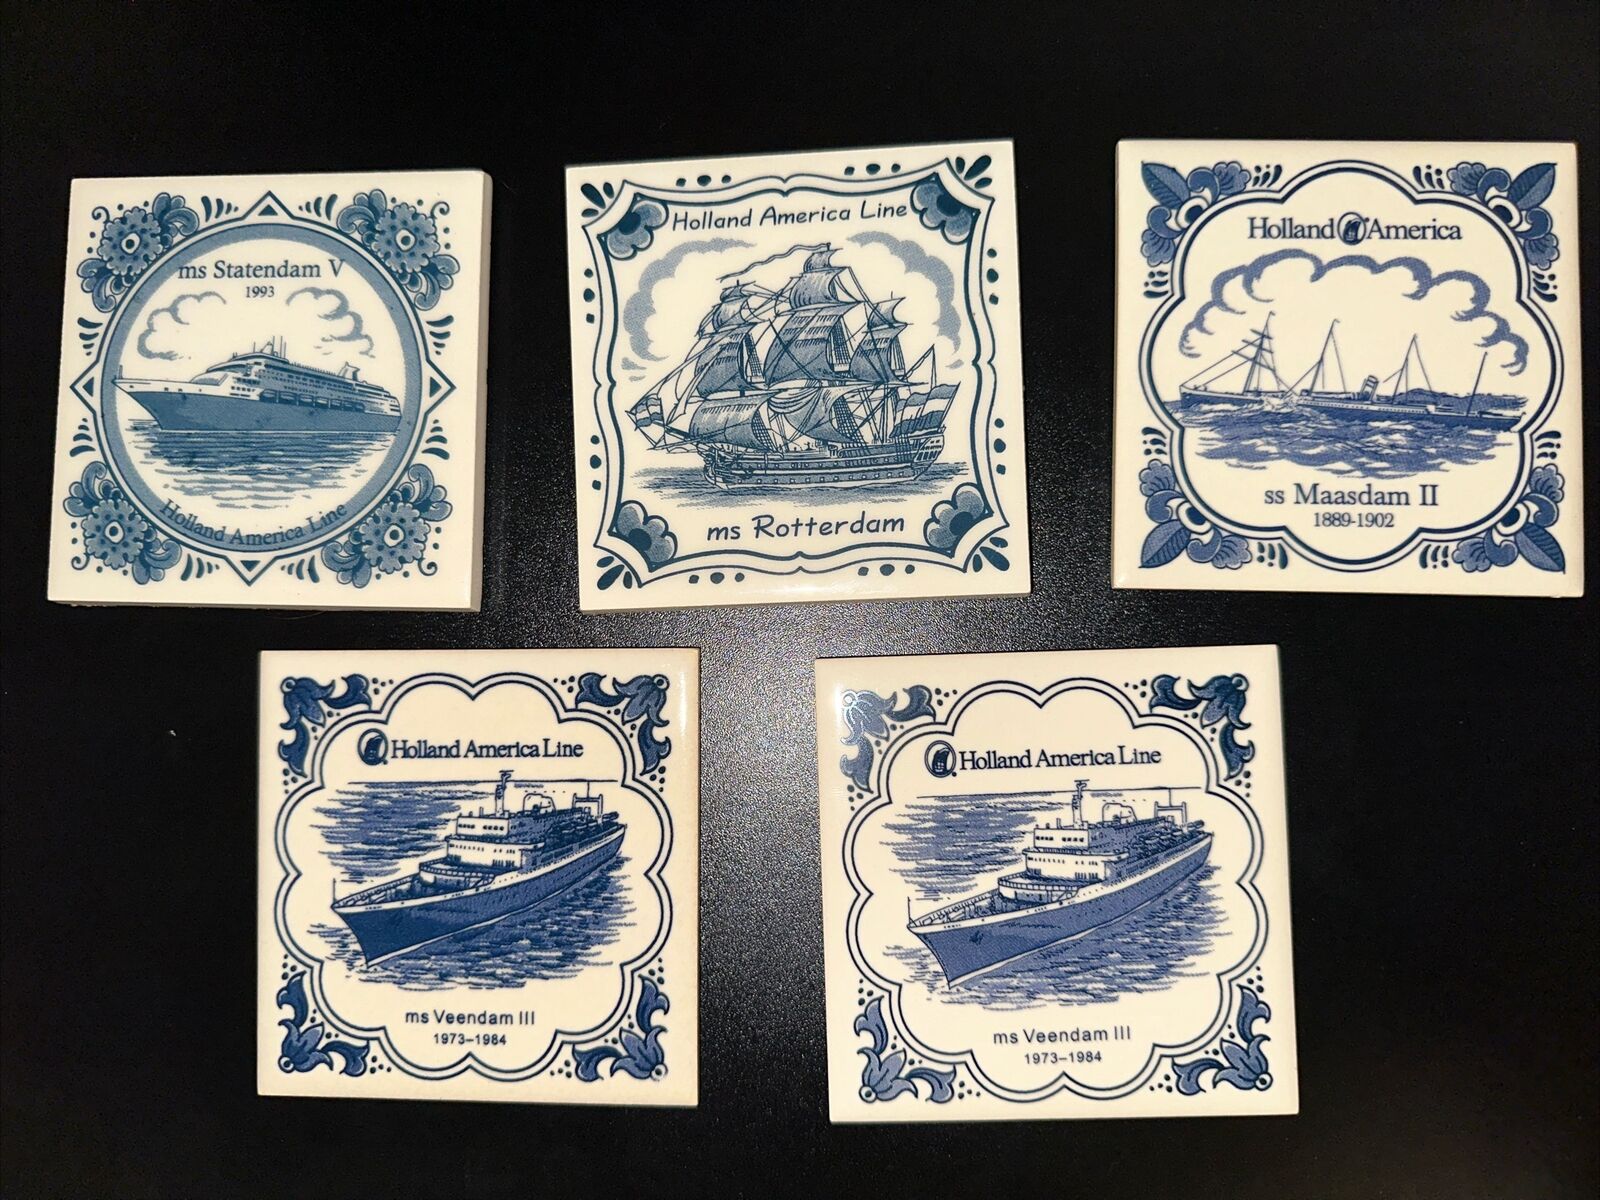 Vintage Holland America Line Ship Blue White Tile Coasters Collection Lot of 5